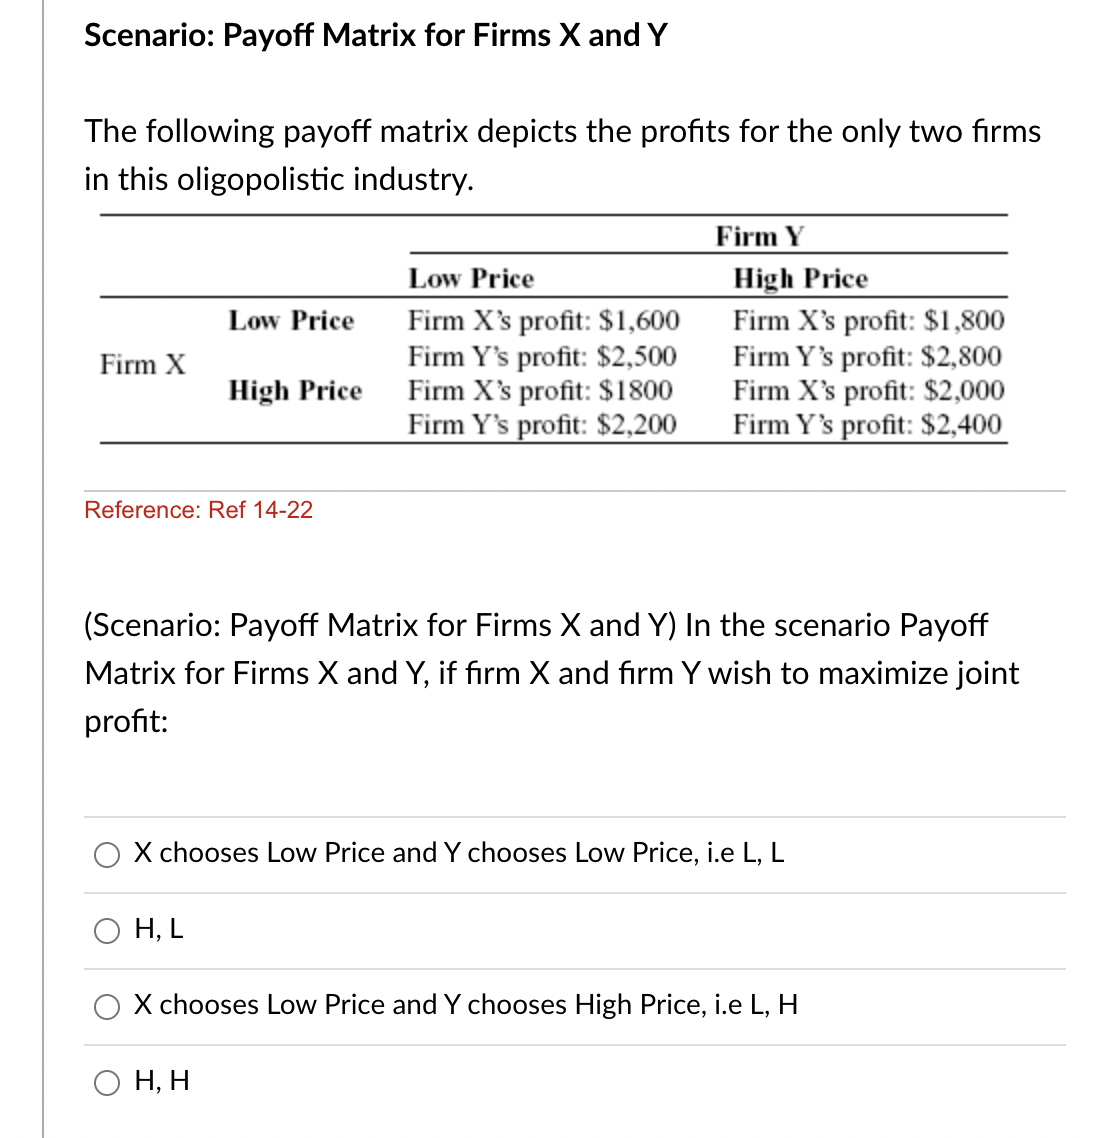 Scenario: Payoff Matrix for Firms X and Y
The following payoff matrix depicts the profits for the only two firms
in this oligopolistic industry.
Firm Y
High Price
Firm X's profit: $1,800
Firm Y's profit: $2,800
Firm X's profit: $2,000
Firm Y's profit: $2,400
Low Price
Firm X's profit: $1,600
Firm Y's profit: $2,500
Firm X's profit: $1800
Firm Y's profit: $2,200
Low Price
Firm X
High Price
Reference: Ref 14-22
(Scenario: Payoff Matrix for Firms X and Y) In the scenario Payoff
Matrix for Firms X and Y, if firm X and firm Y wish to maximize joint
profit:
X chooses Low Price and Y chooses Low Price, i.e L, L
H, L
O X chooses Low Price and Y chooses High Price, i.e L, H
Н, Н
